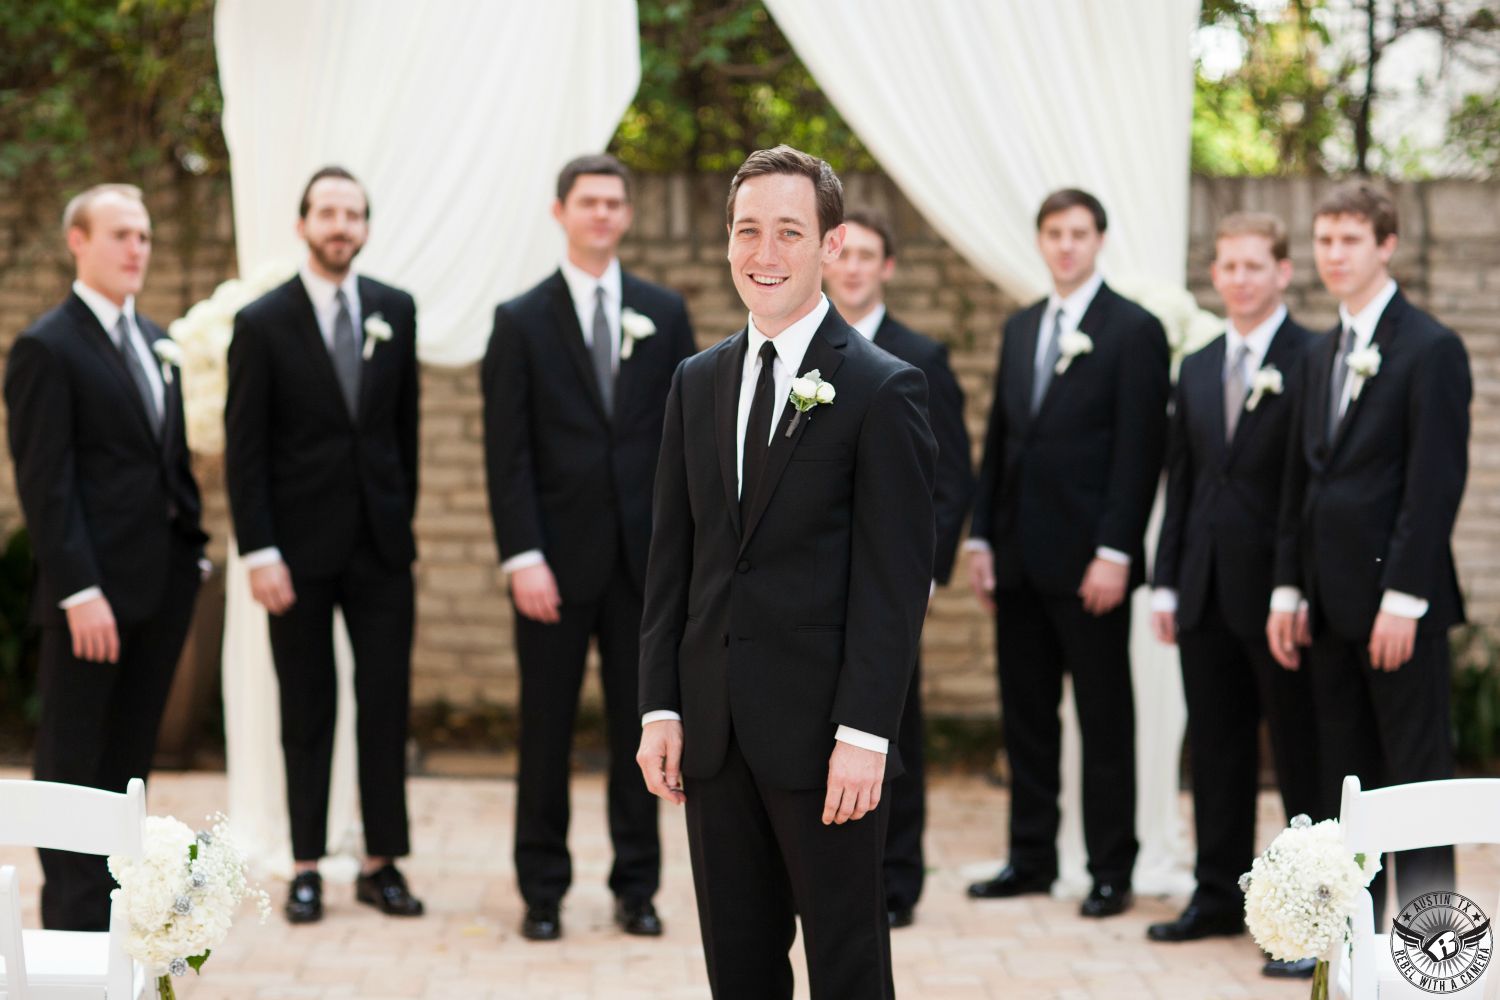 wedding photo of groom and groomsmen in black tuxedos at wedding ceremony site at Texas Federation of Women's Clubs Headquarters Mansion Austin wedding venue taken by austin wedding photographer.